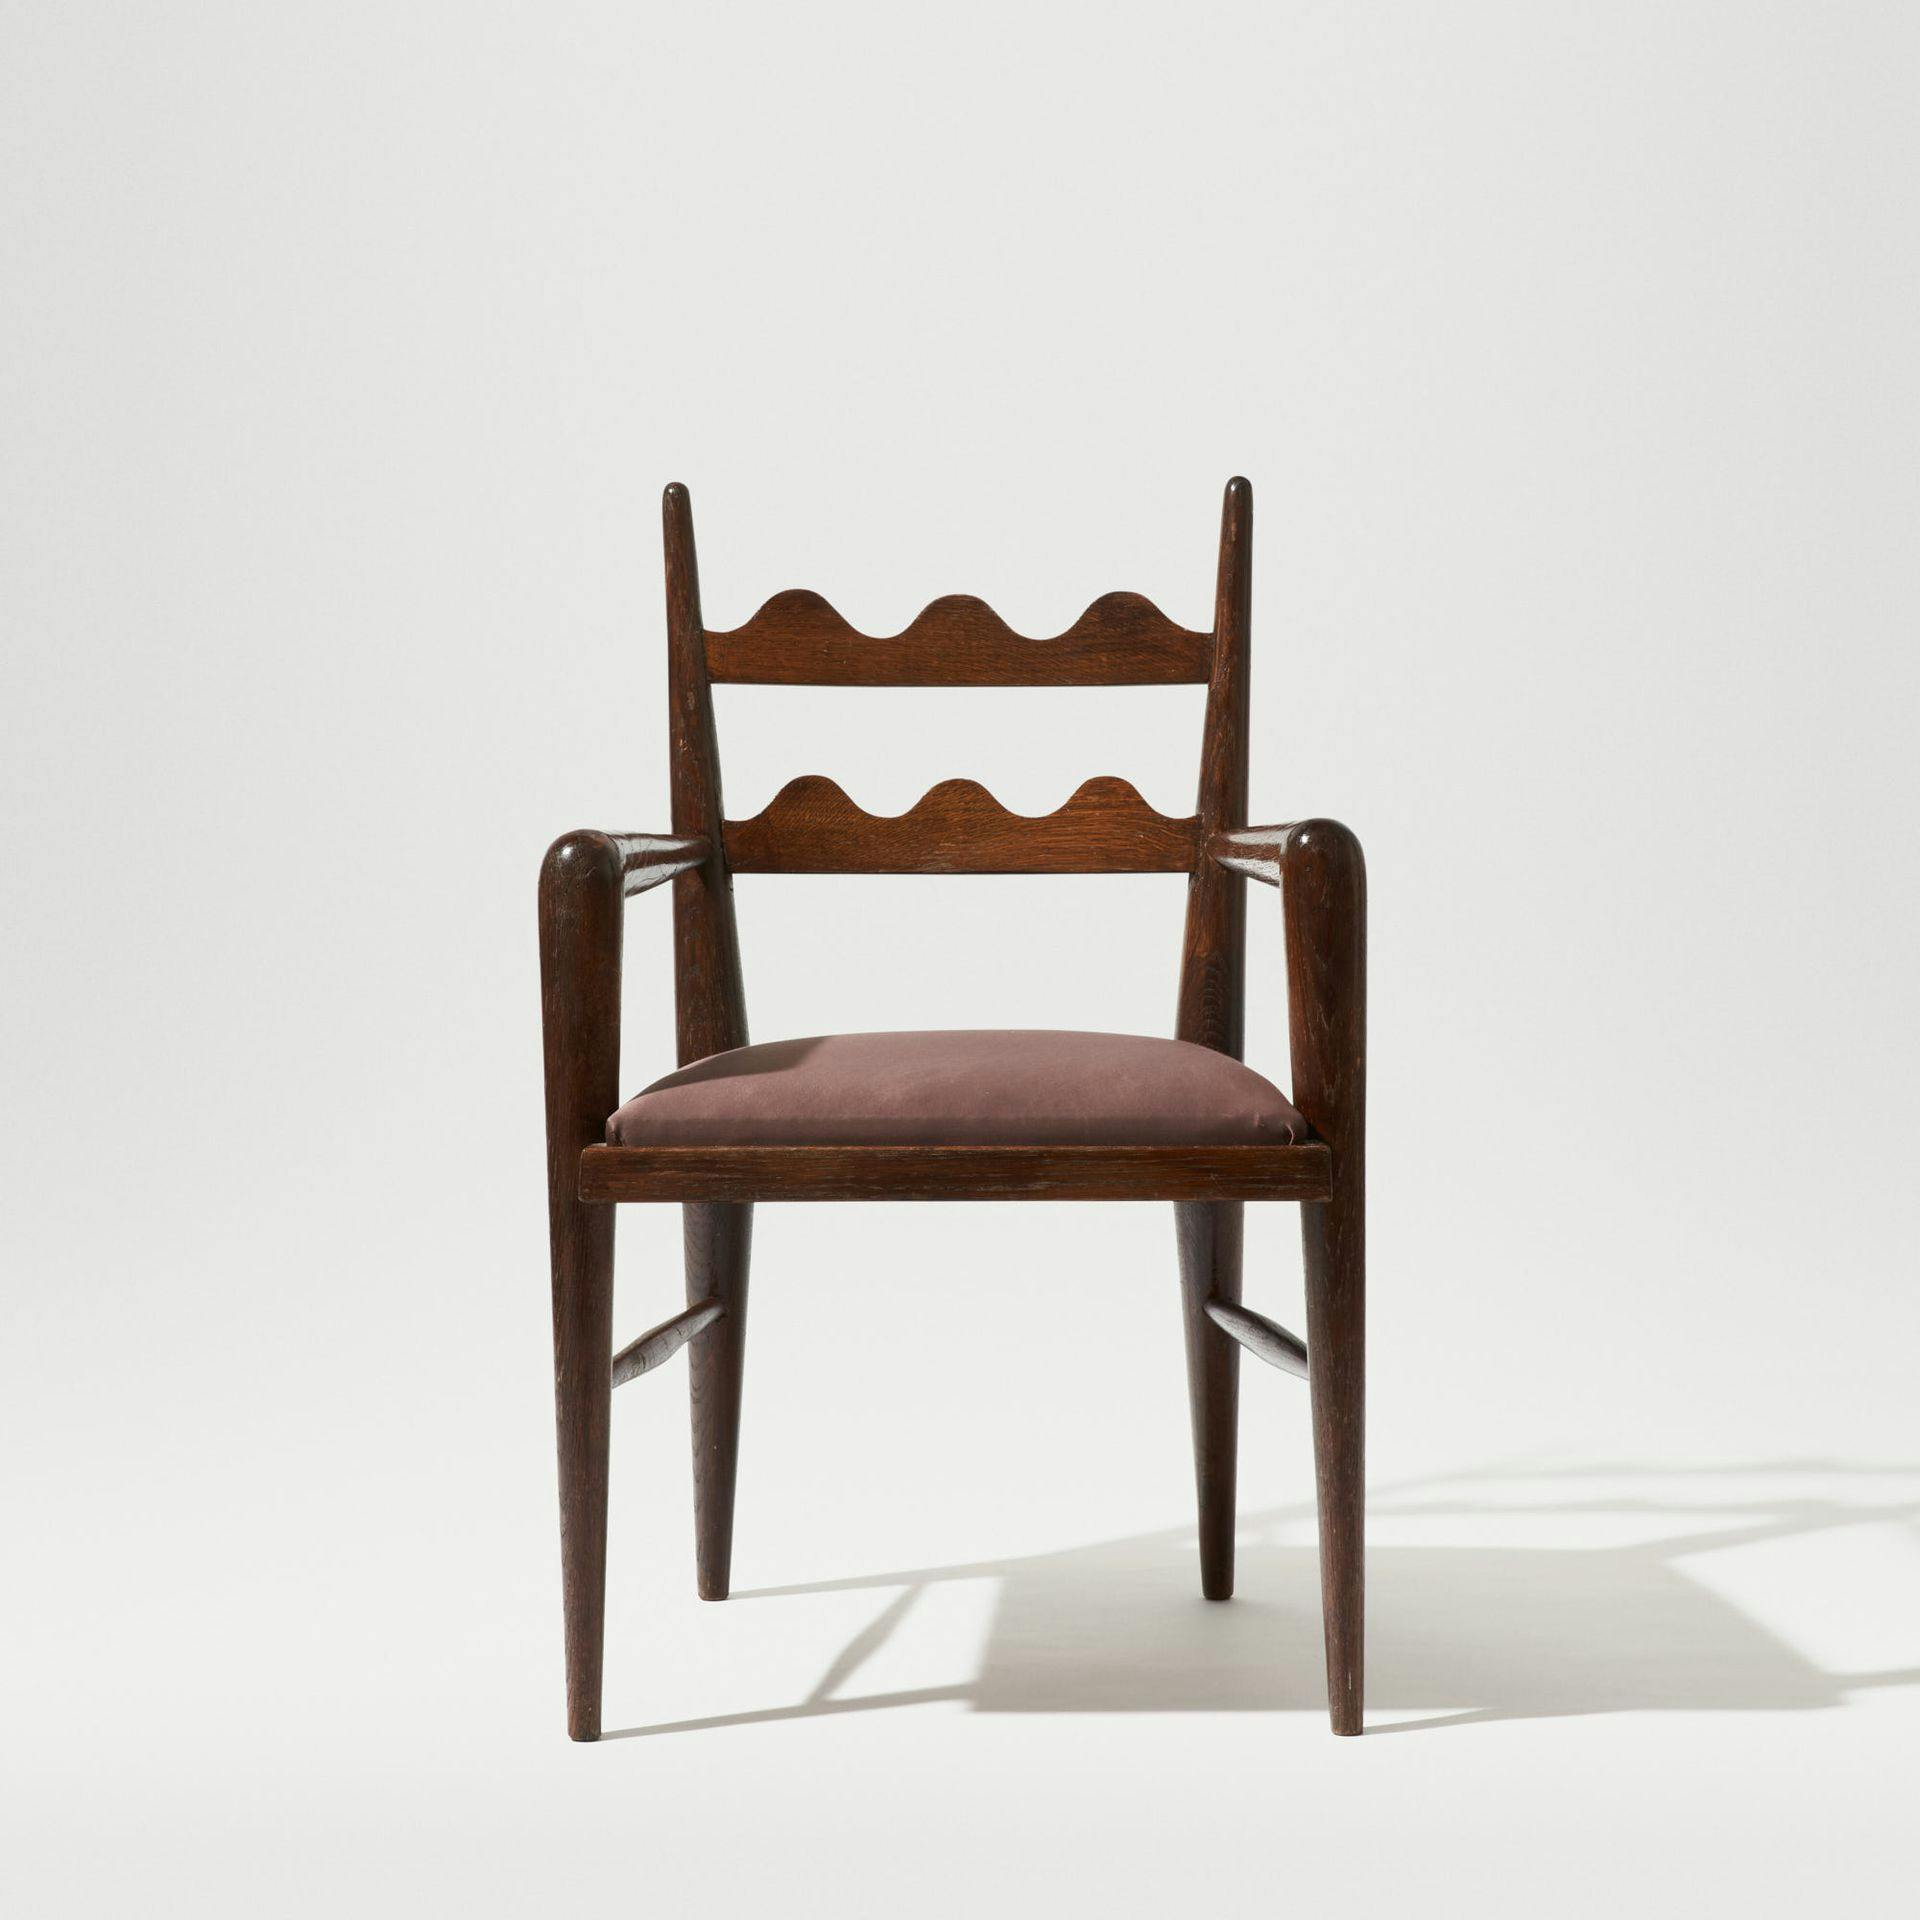 Jean Royère Ondulation chair-images